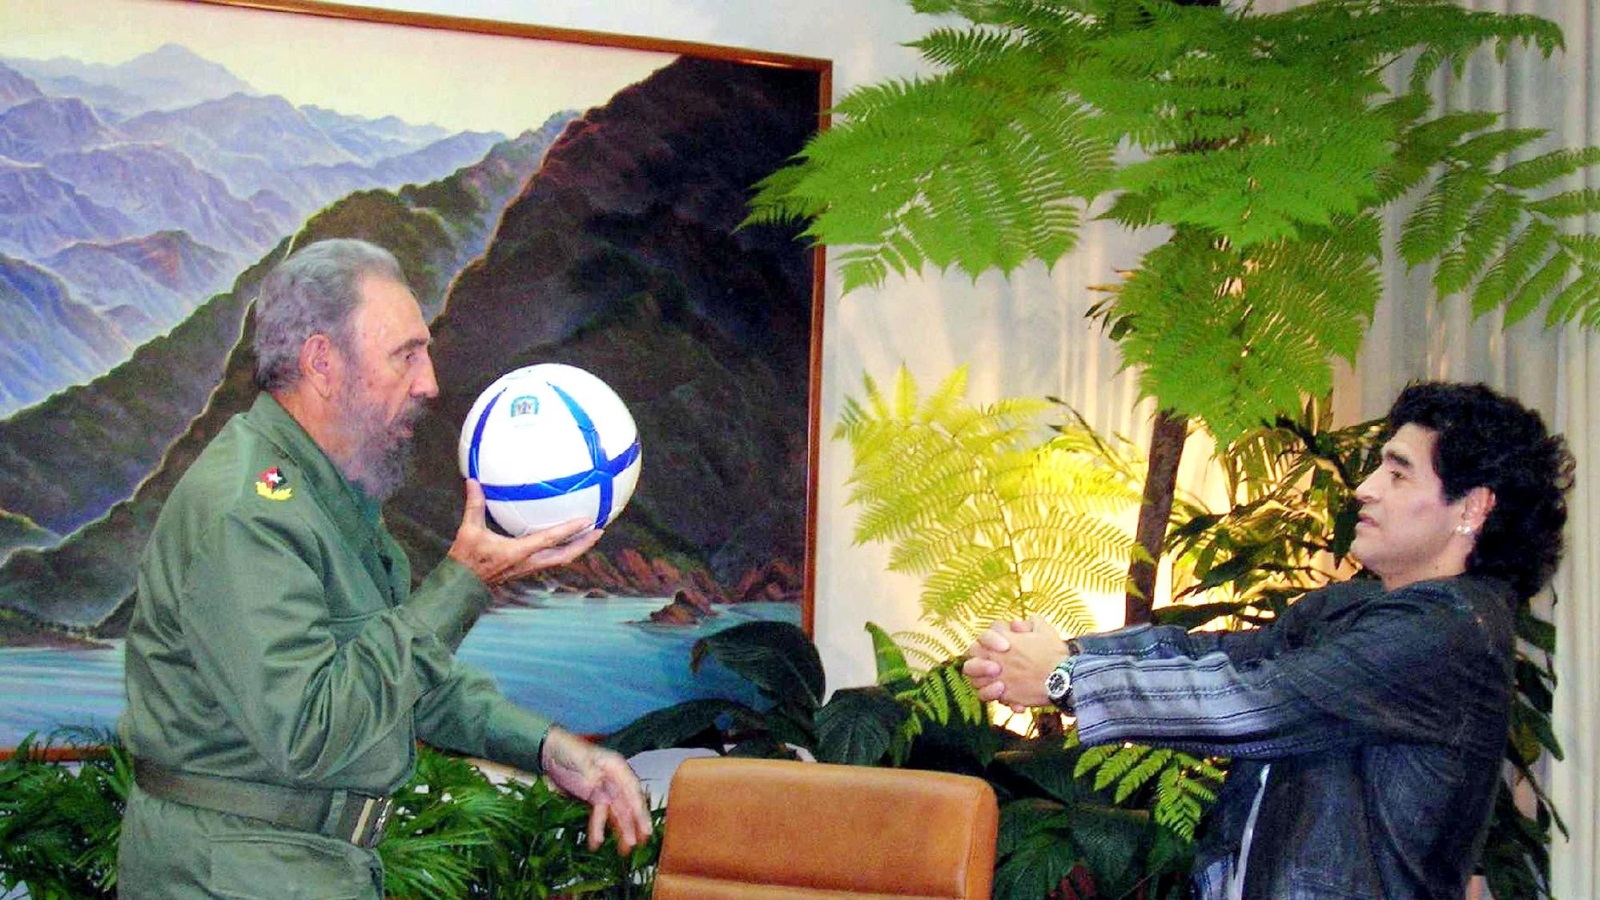 Cuban President Fidel Castro (L) and Argentine soccer legend Diego Maradona play with a ball during an interview in La Havana, in this October 26, 2005 file photo. REUTERS/Canal 13/Handout/File Photo      ATTENTION EDITORS - THIS IMAGE WAS PROVIDED BY A THIRD PARTY. EDITORIAL USE ONLY.